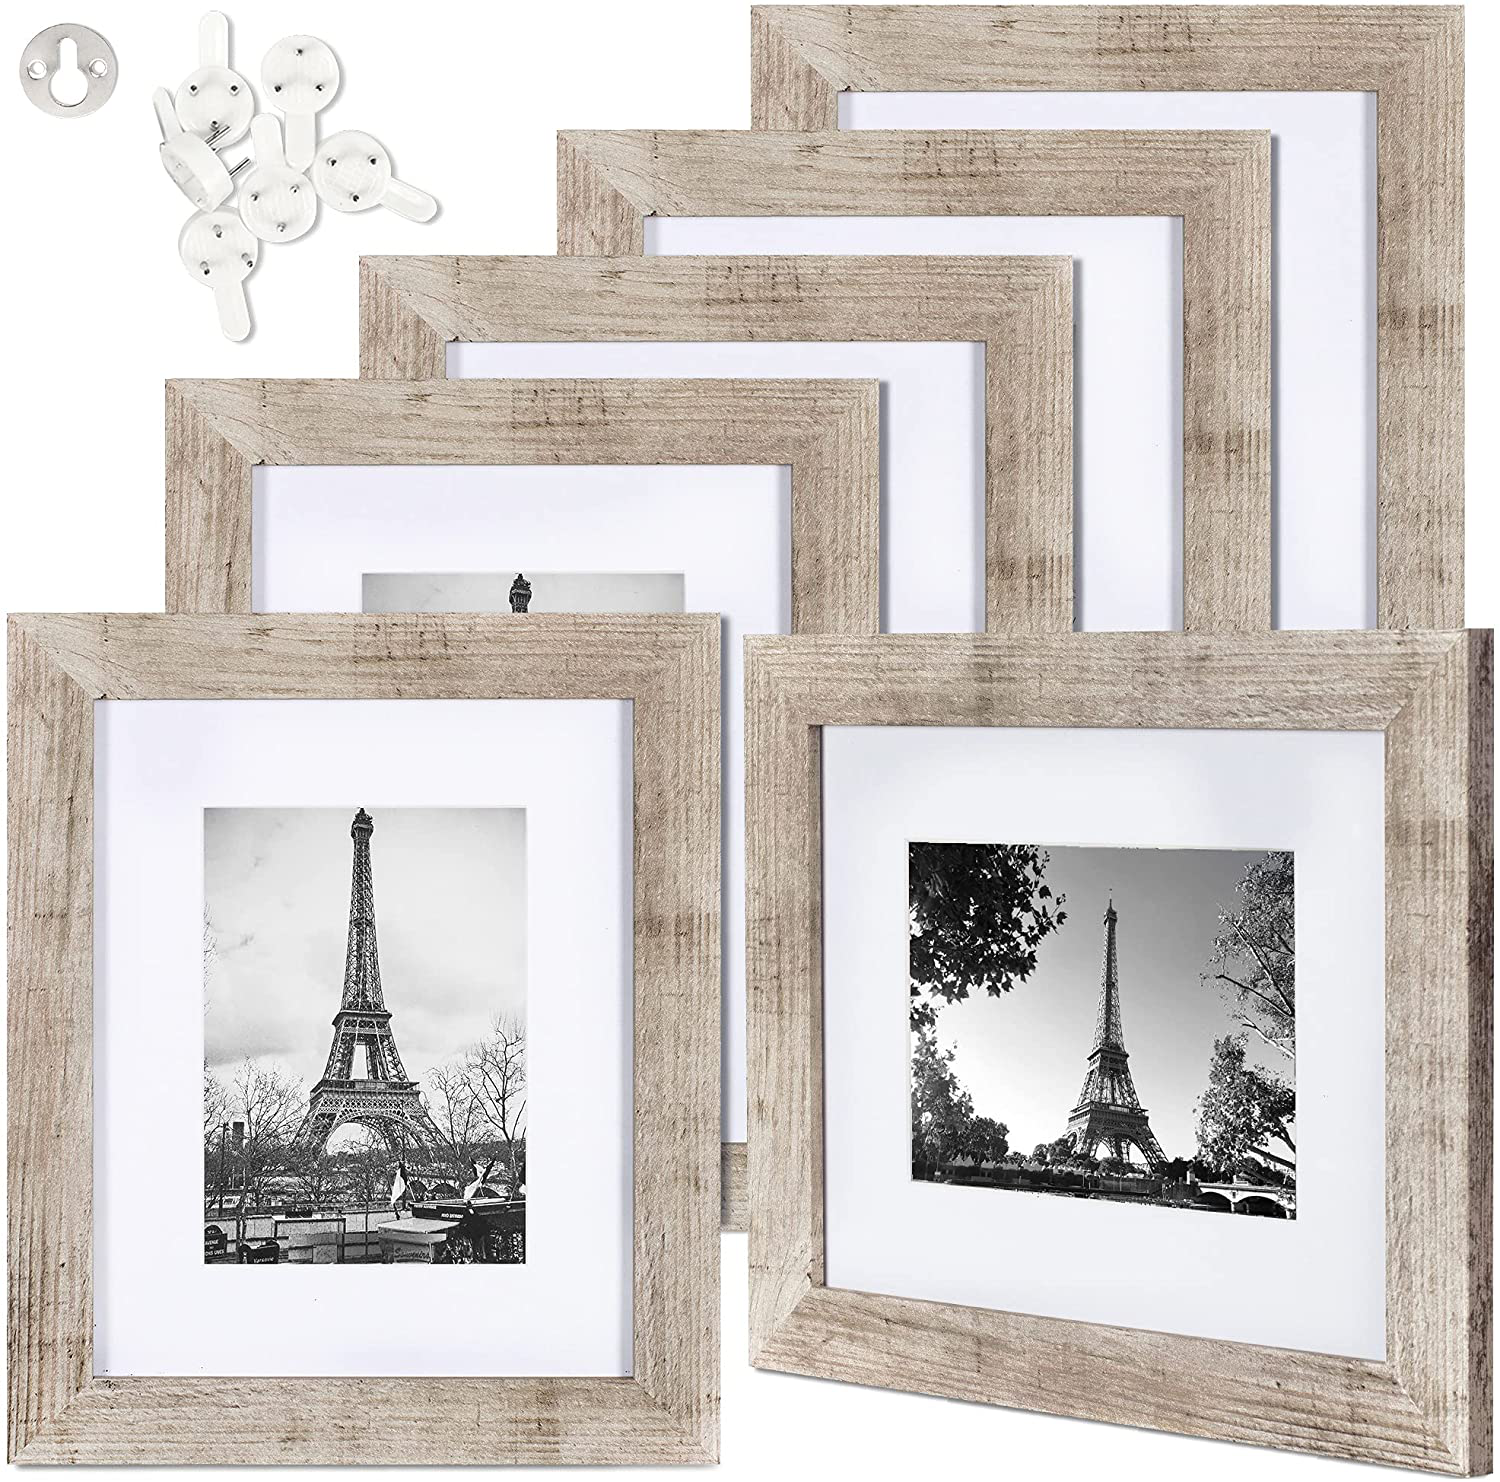 upsimples 8x10 Picture Frame Distressed White with Real Glass,Display Pictures 5x7 with Mat or 8x10 Without Mat,Multi Photo Frames Collage for Wall or Tabletop Display,Set of 6